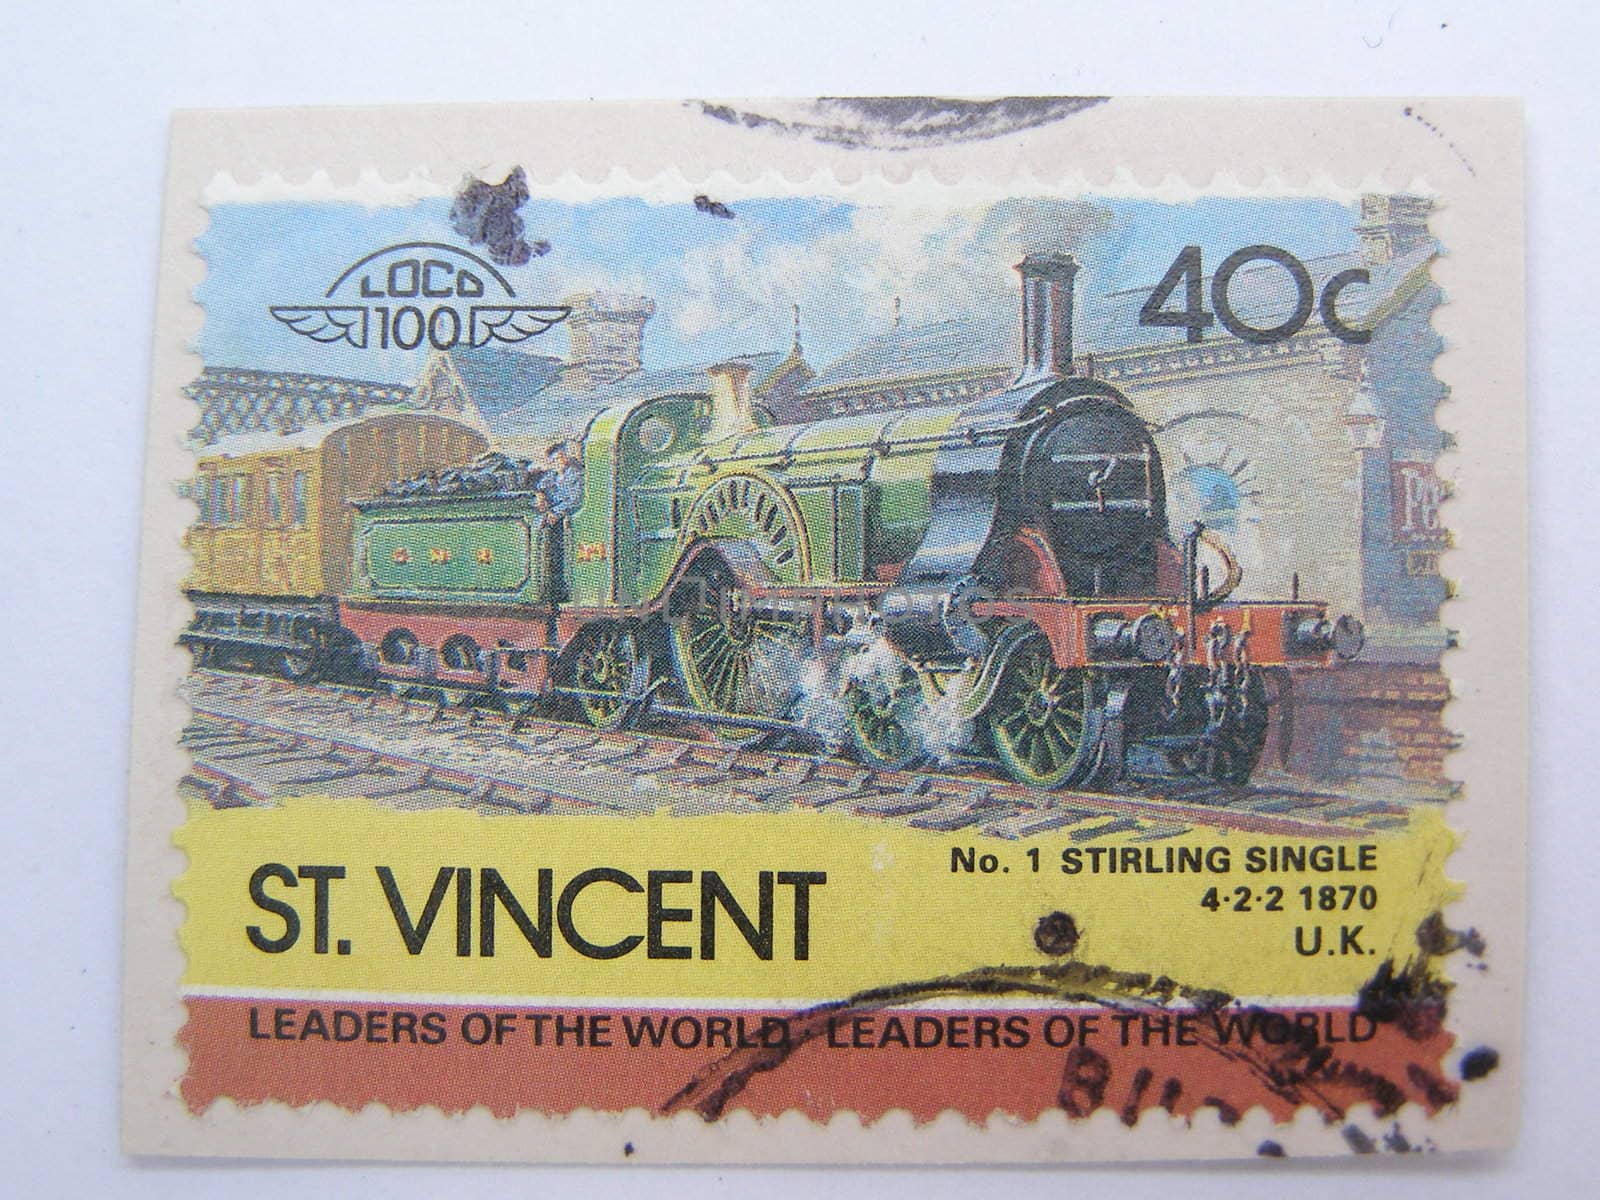 mail stamp from St. Vincent